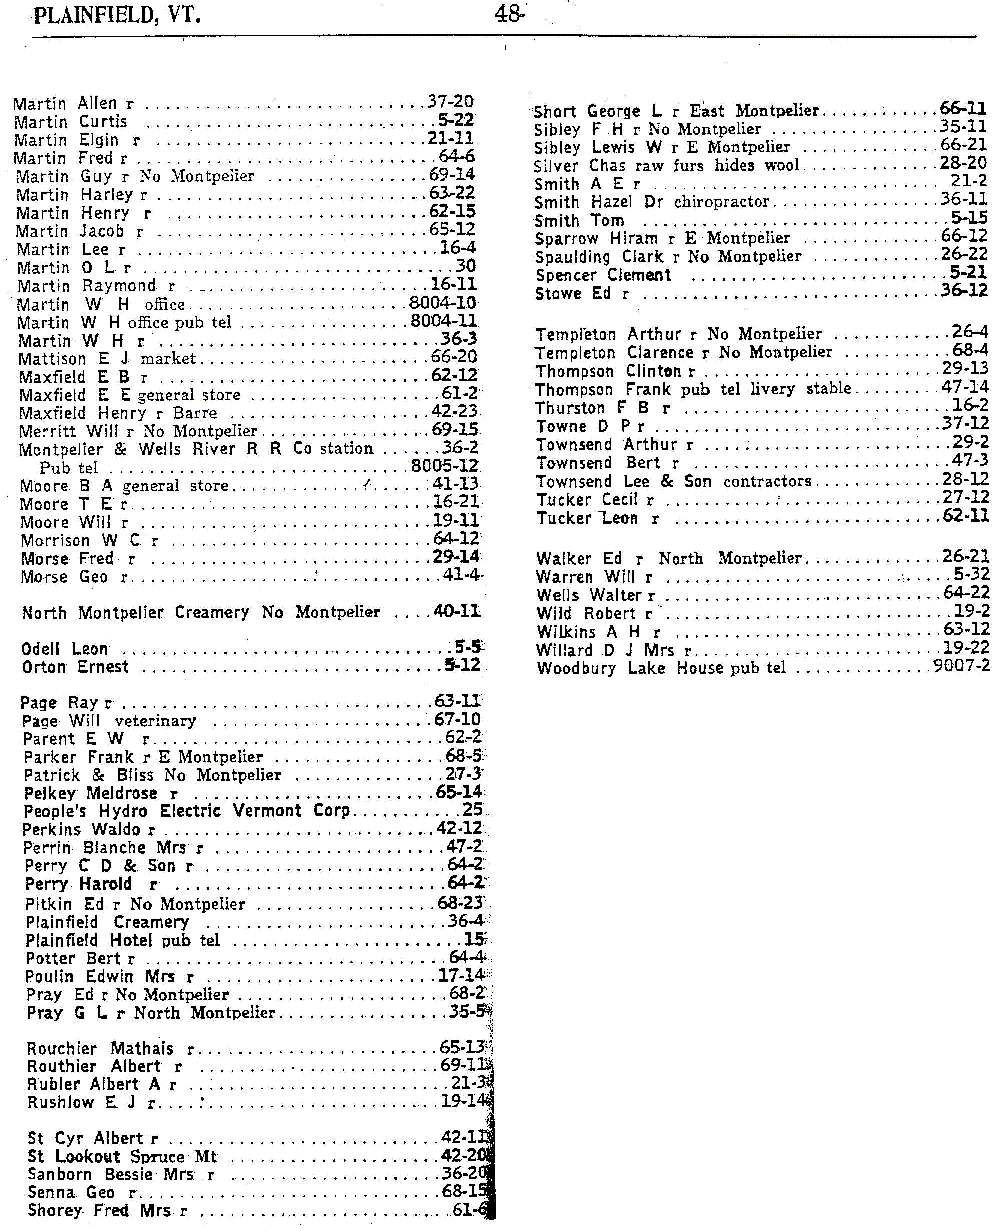 1928 Plainfield Vt Telephone Book - Page 48